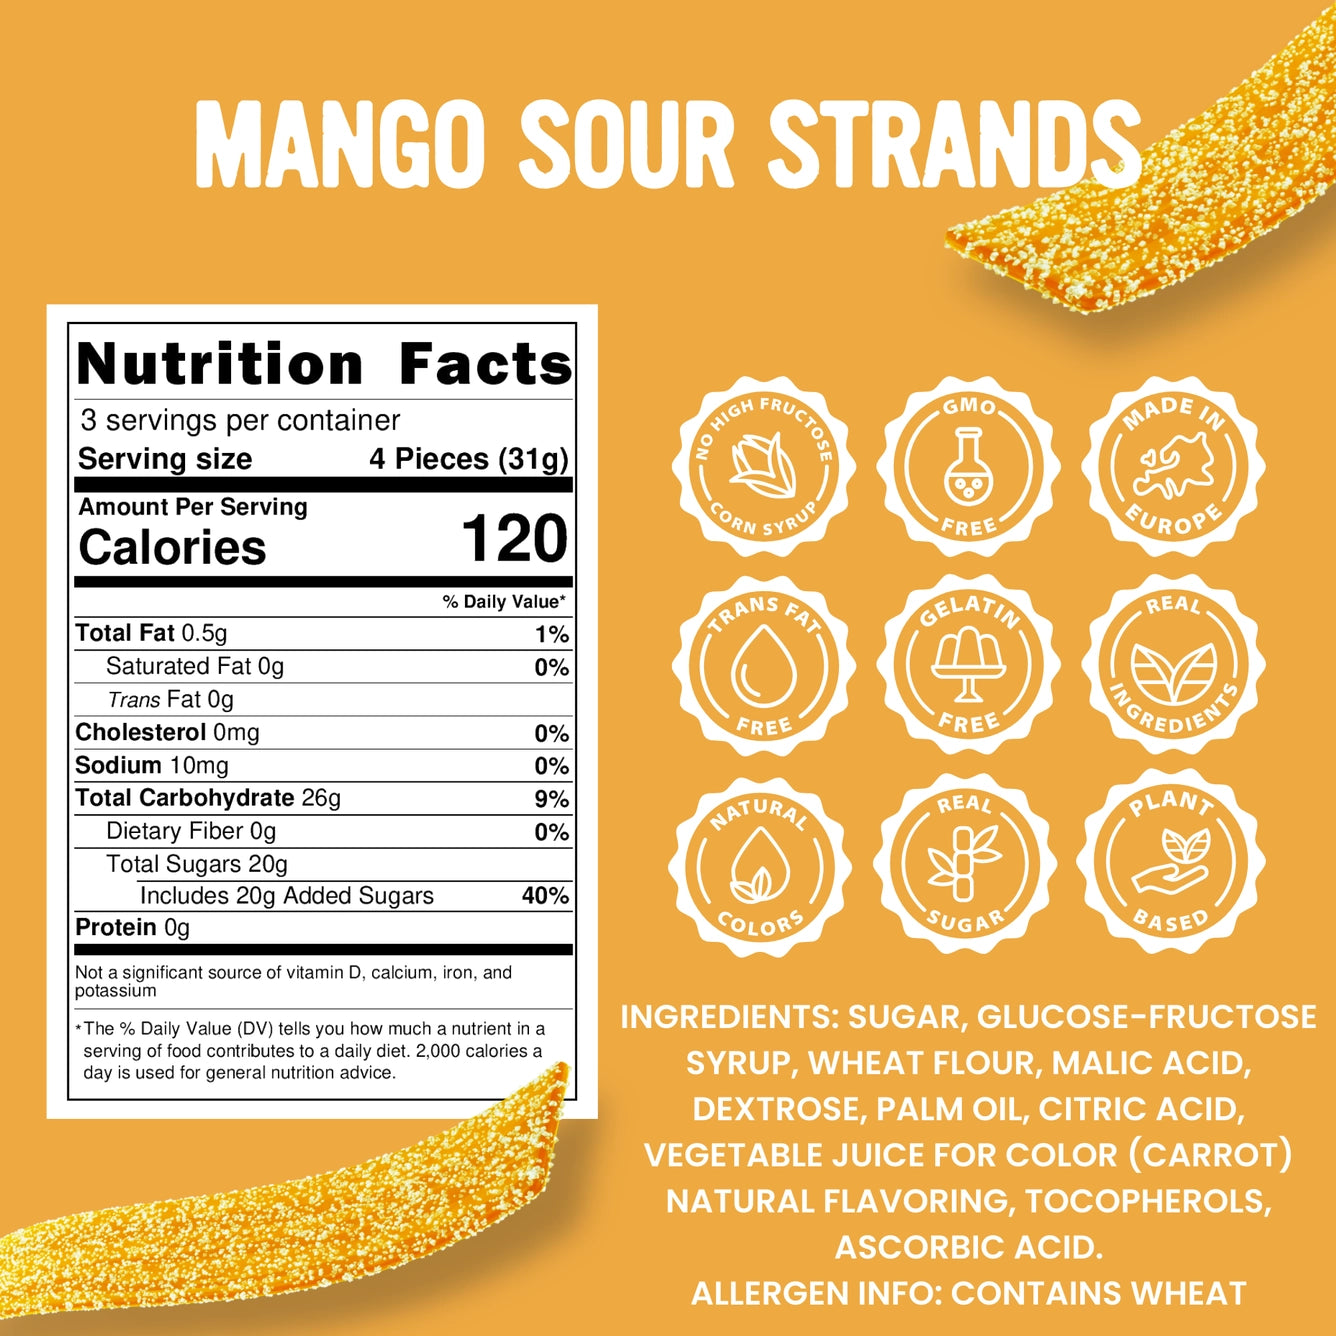 Saturday Sweets | Mango Sour Strands (92g)